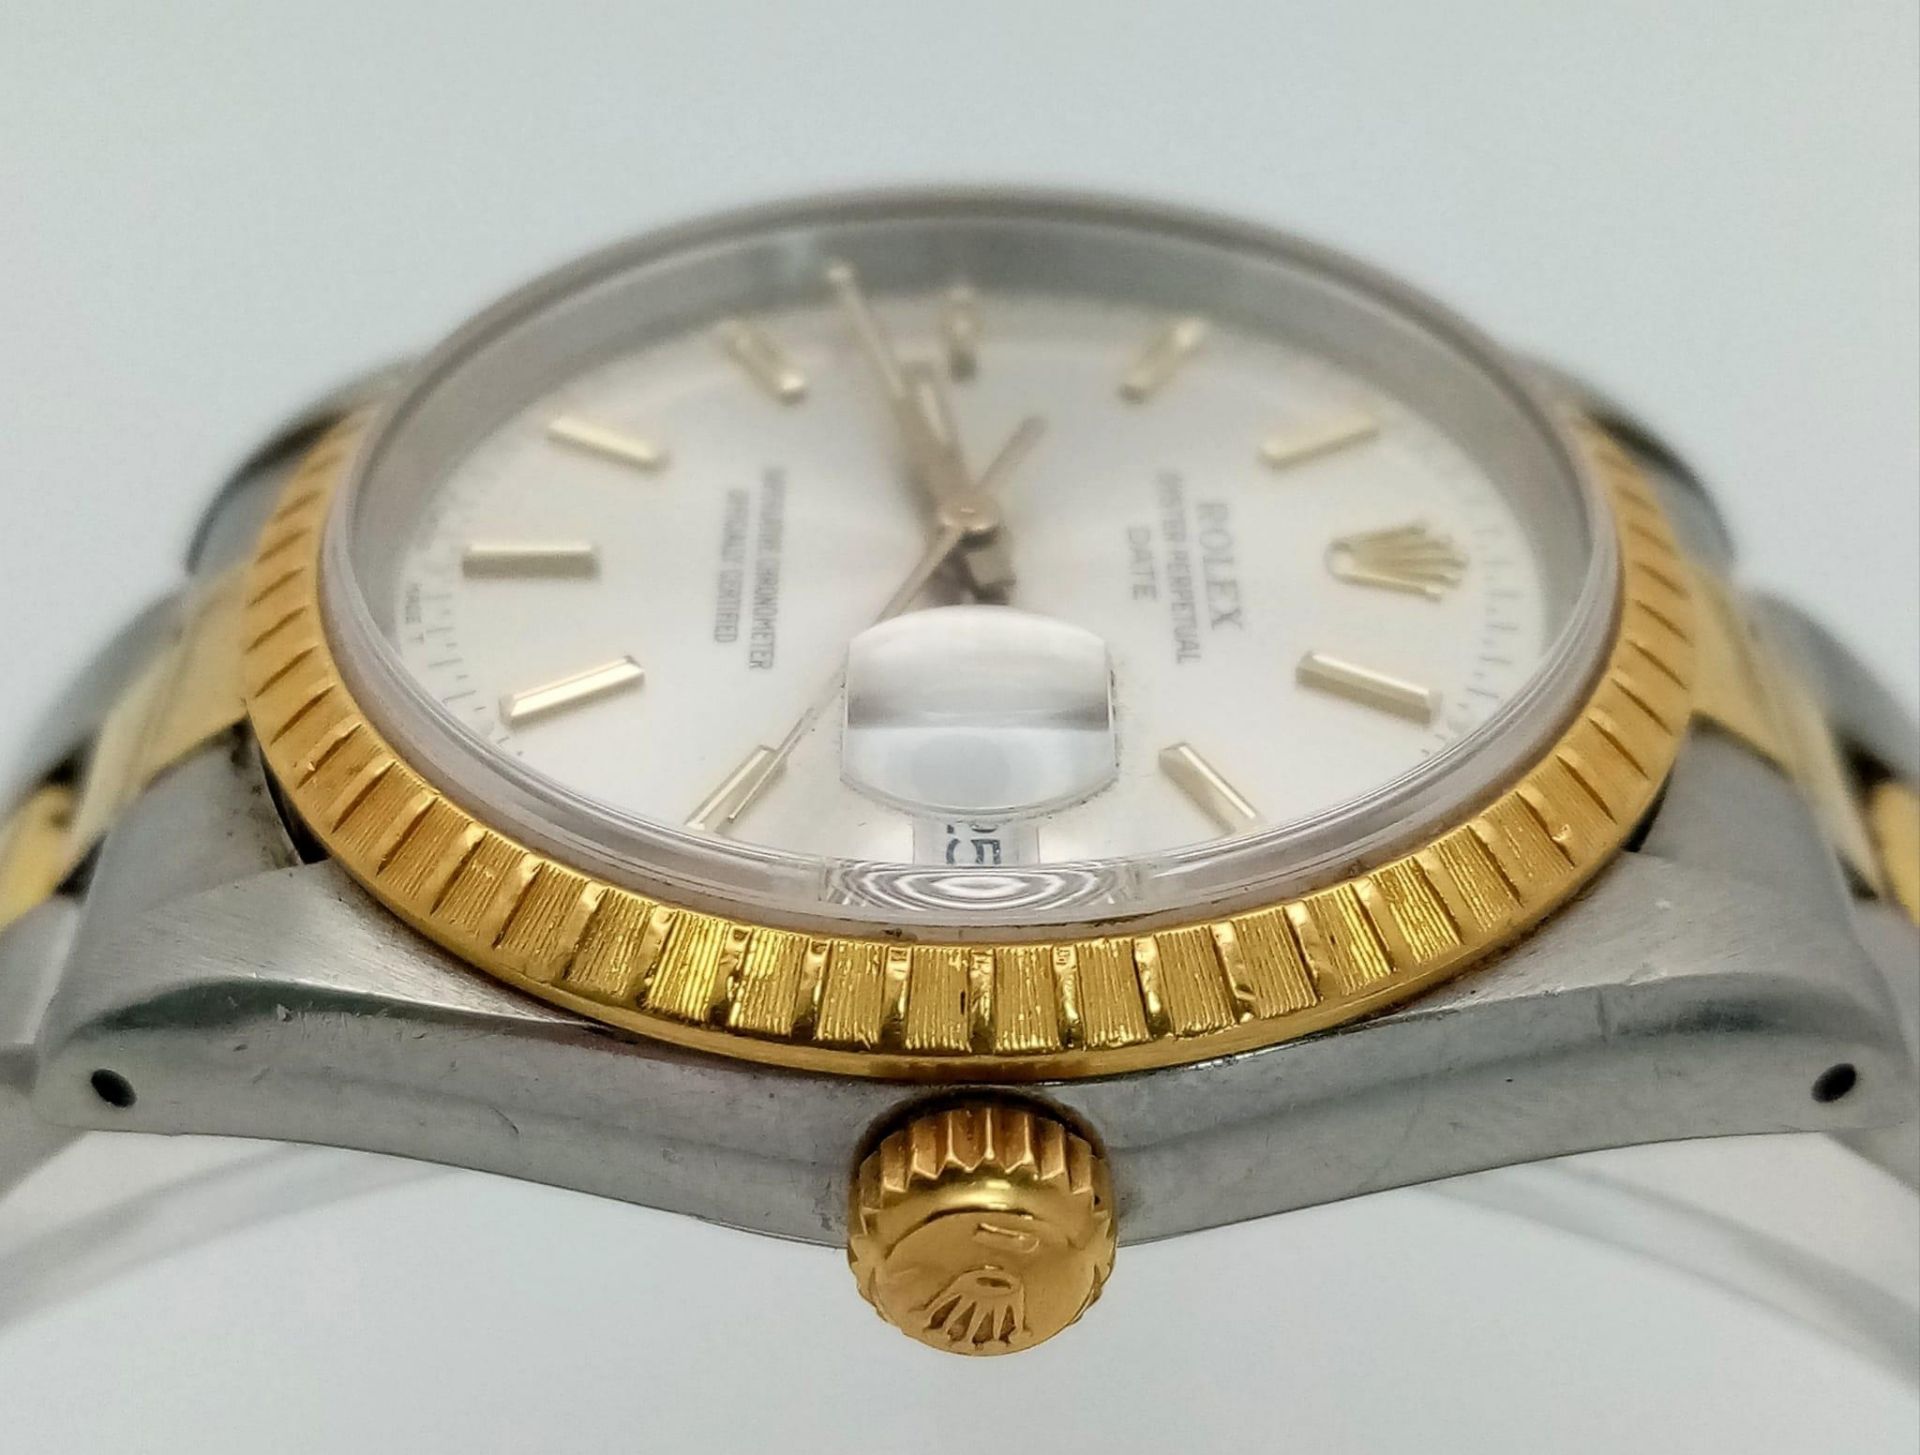 THE CLASSIC ROLEX OYSTER PERPETUAL DATE AUTOMATIC BI-METAL GENTS WATCH WITH TASTEFUL SILVERTONE DIAL - Image 6 of 19